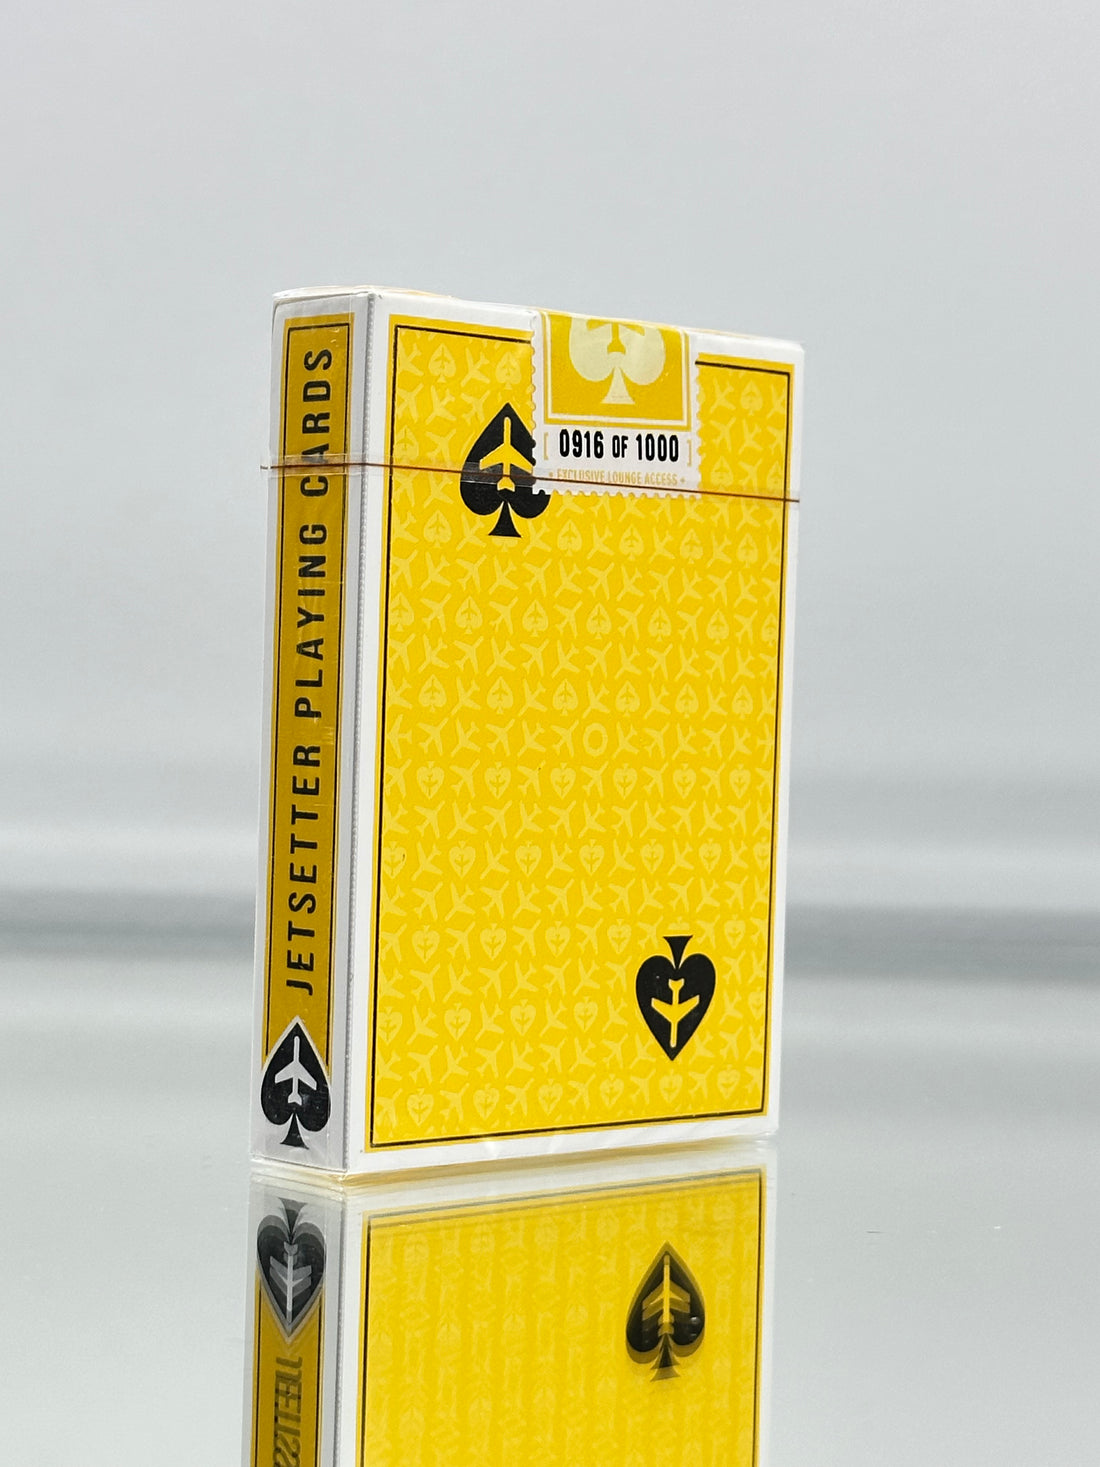 Jetsetter Lounge Limited Yellow Playing Cards EPCC